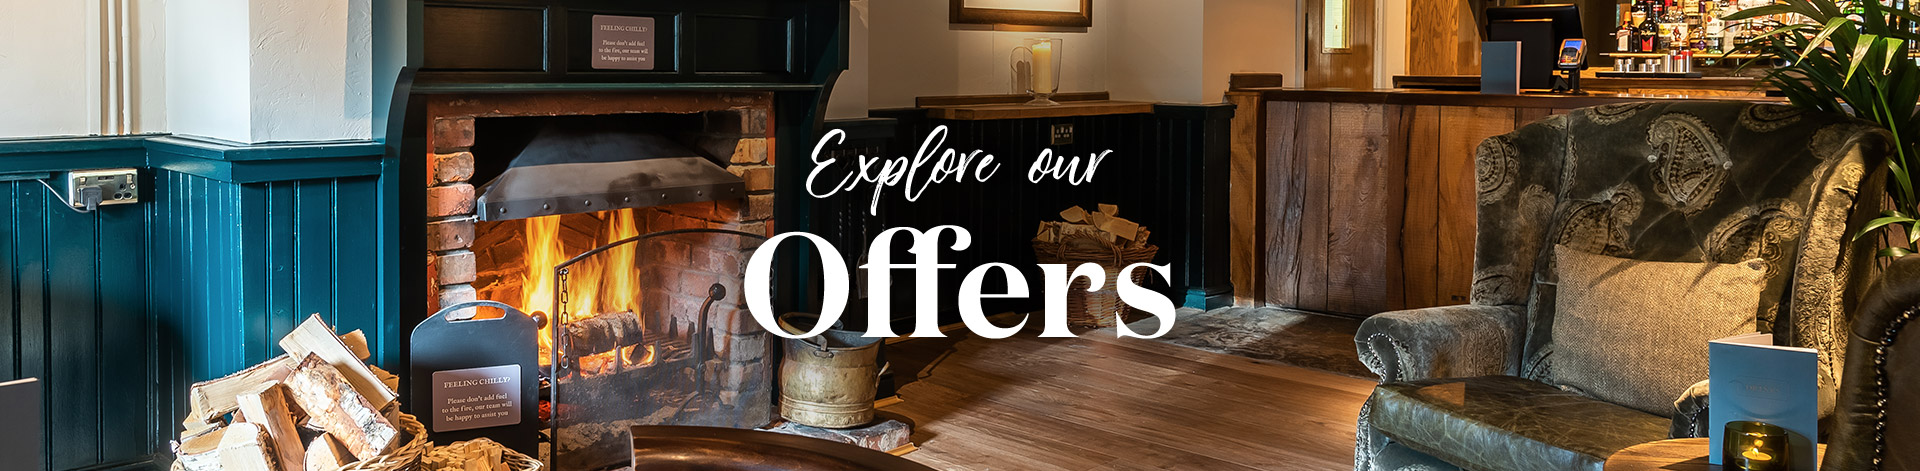 Our latest offers at The Windhover